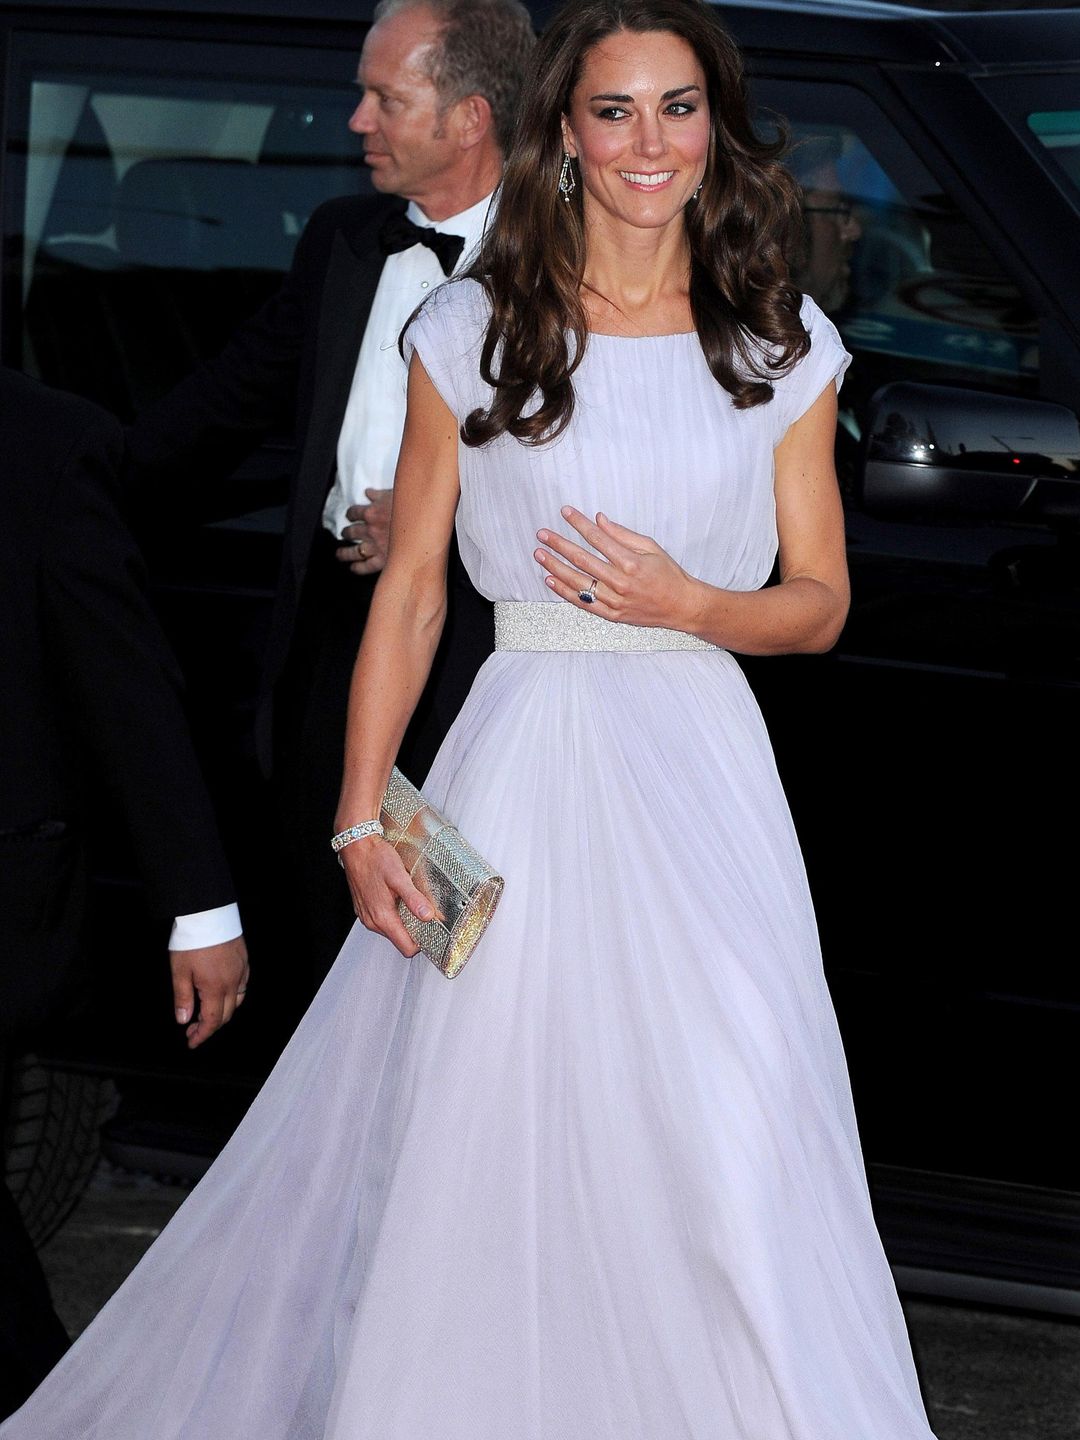 The Duchess of Cambridge attends the BAFTA Brits at the Belasco Theatre in Alexander McQueen gown